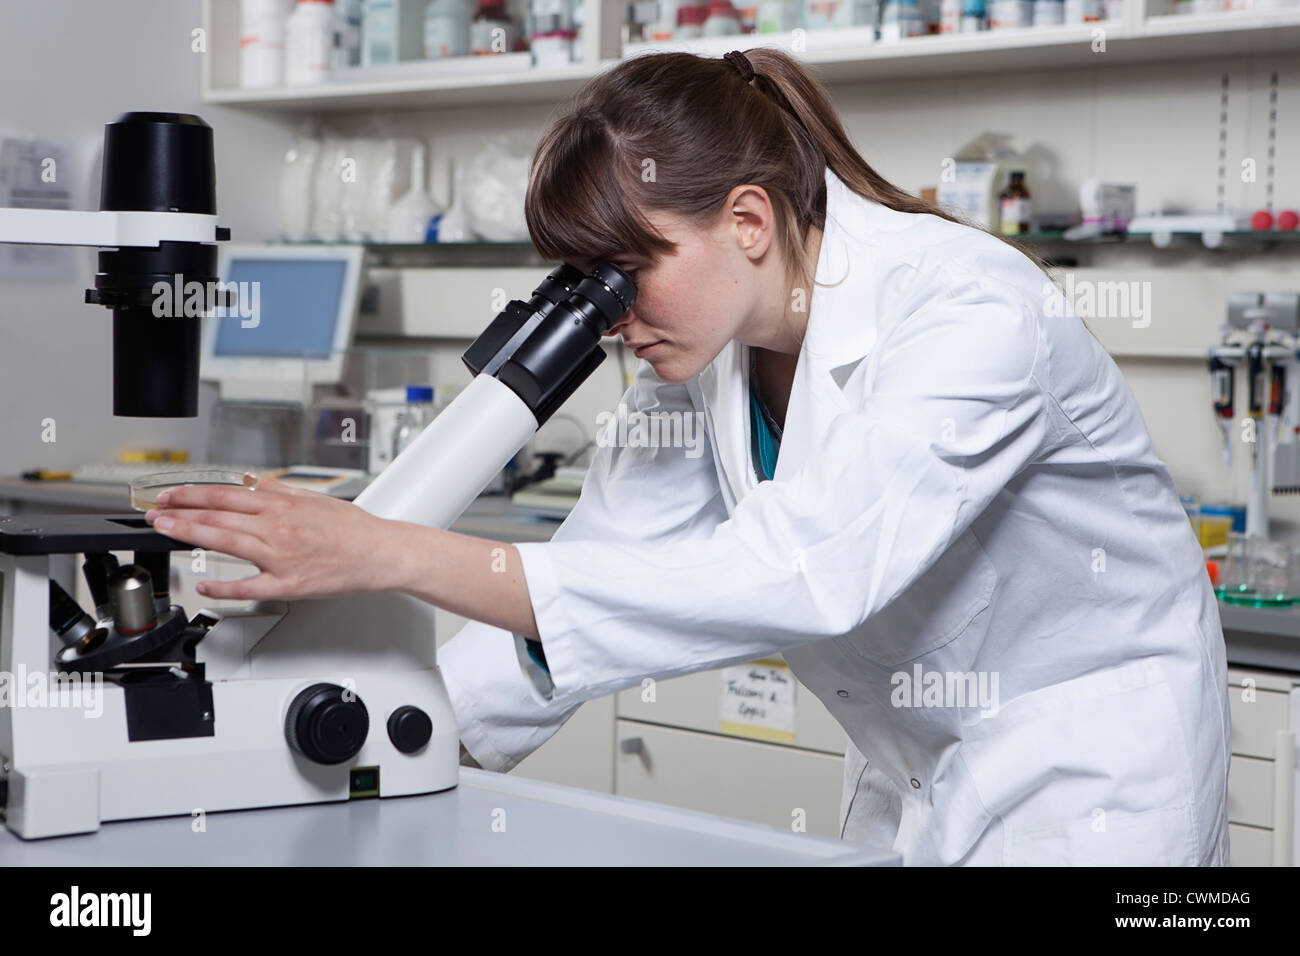 Germany, Bavaria, Munich, Scientist with microscope in laboratory Stock Photo